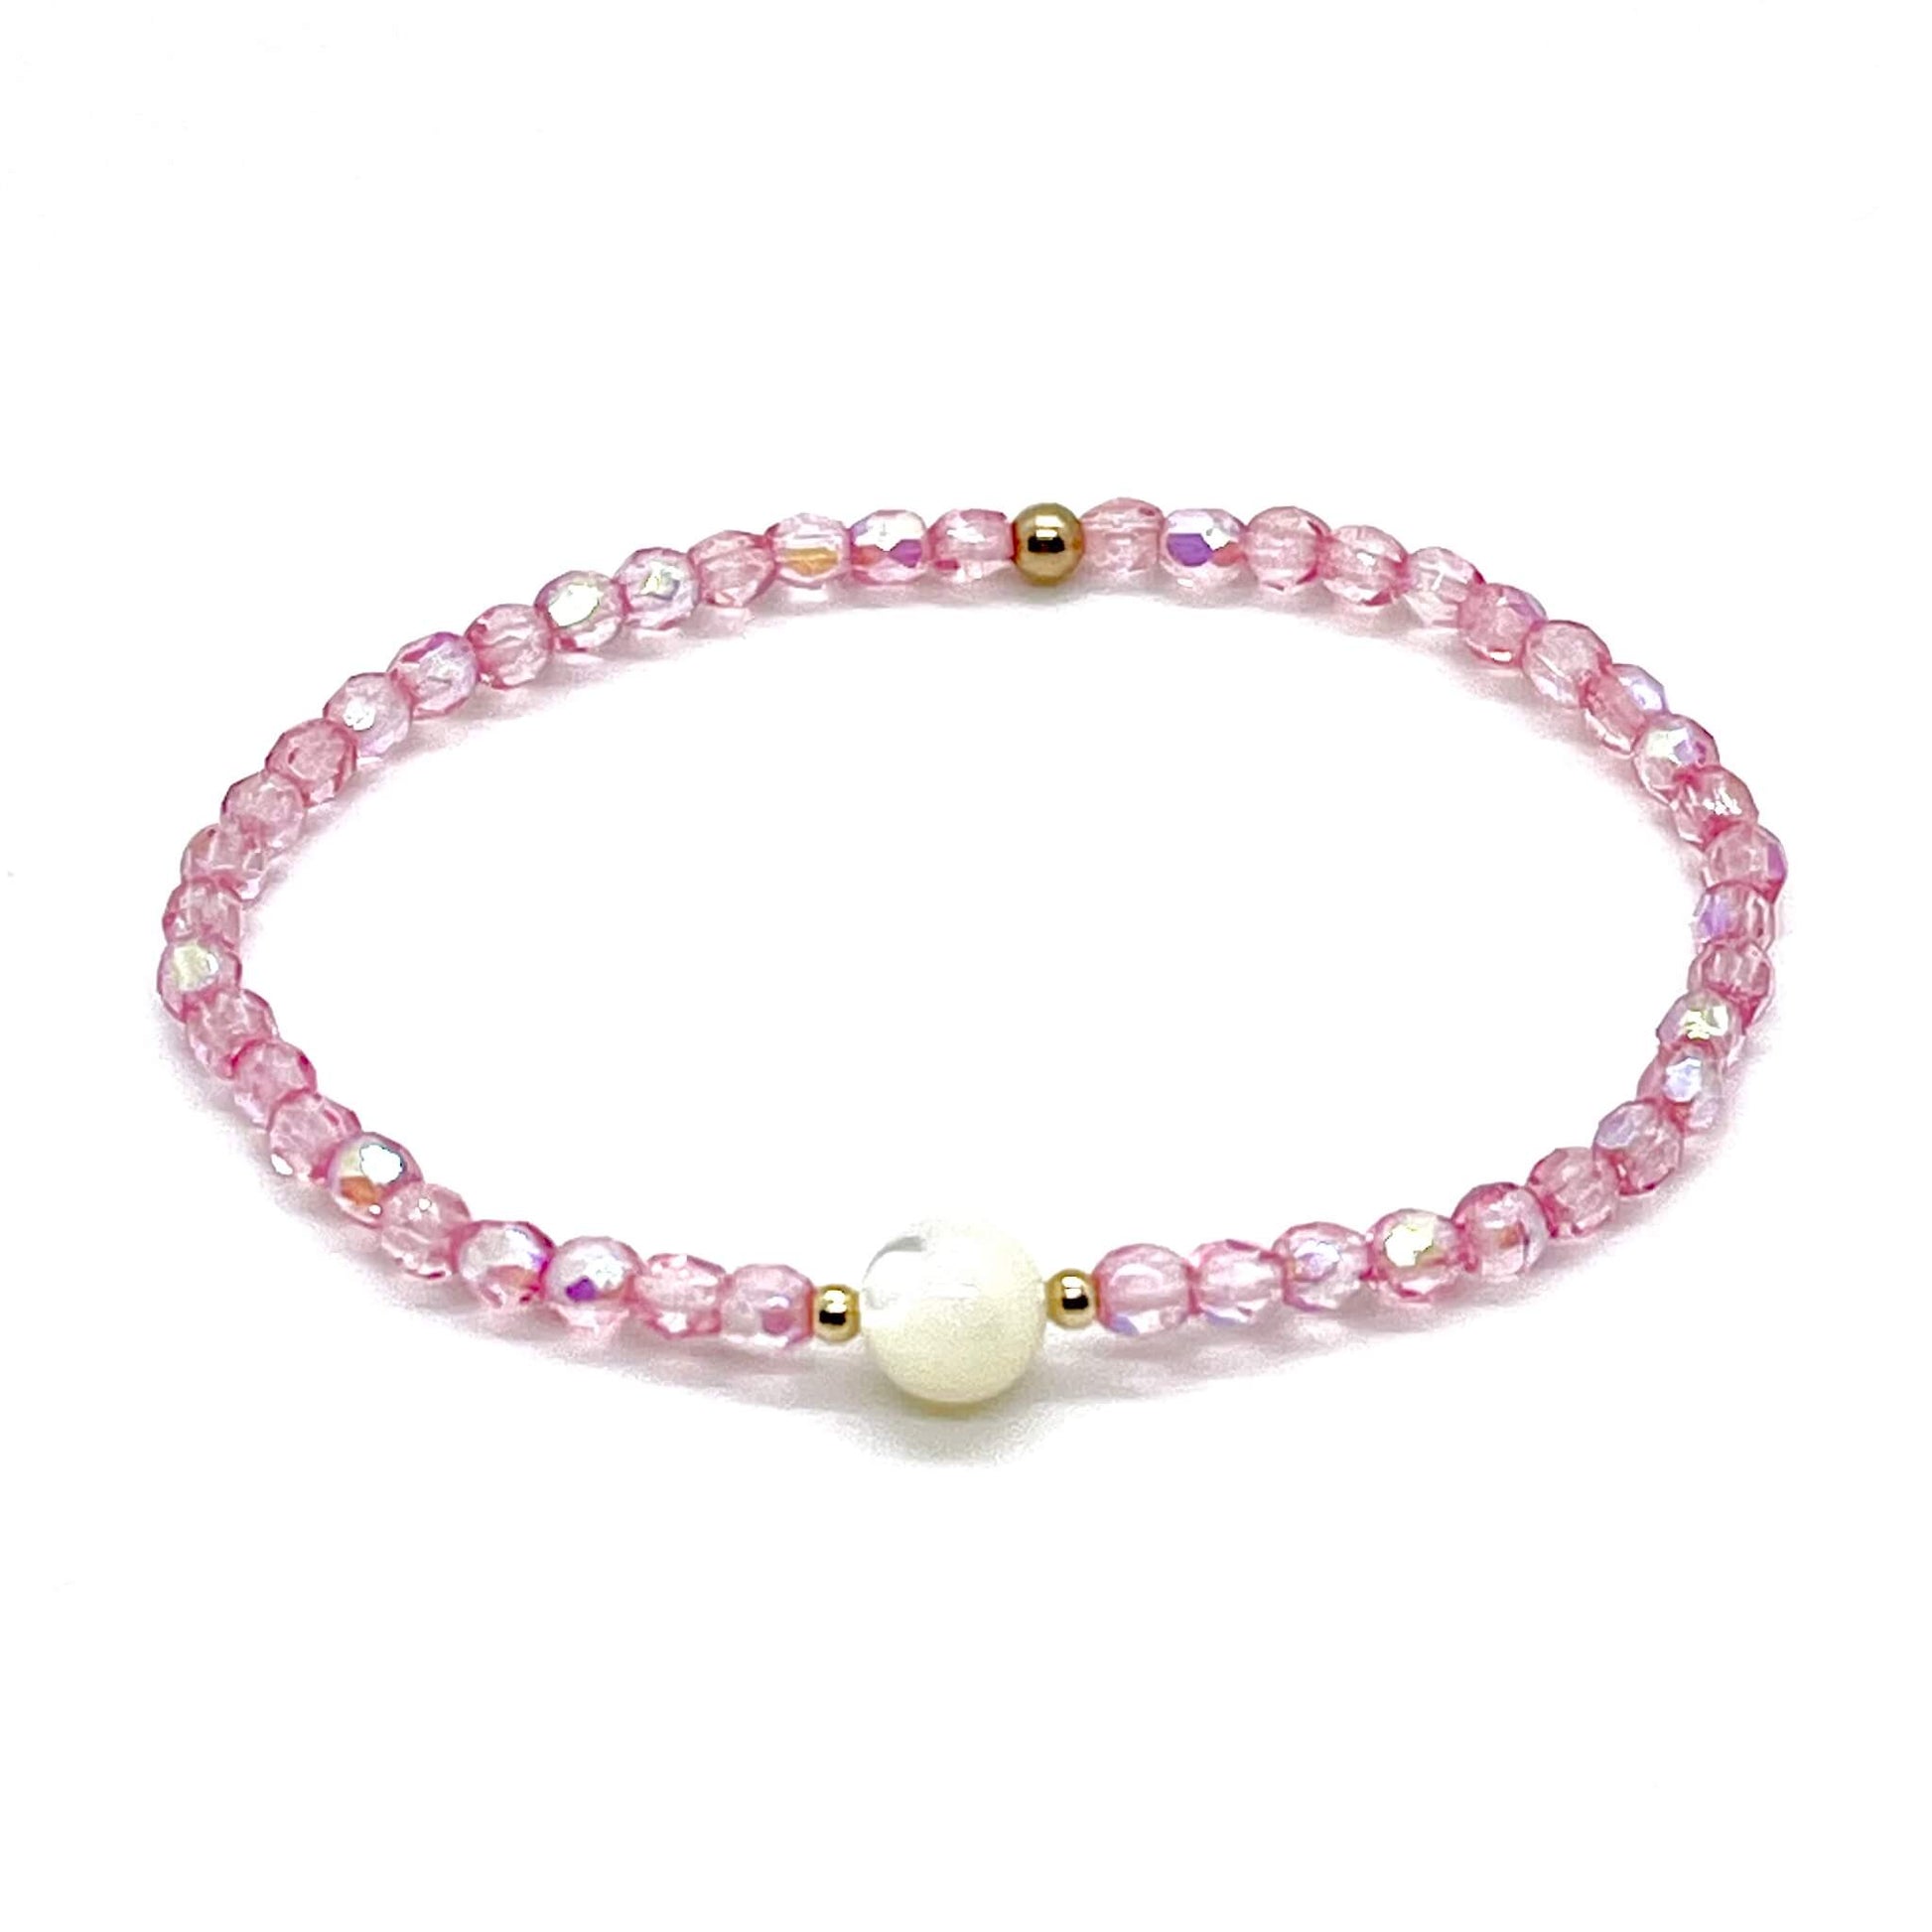 Pink crystal bracelet with a mother-of-pearl center bead and small gold accent beads.